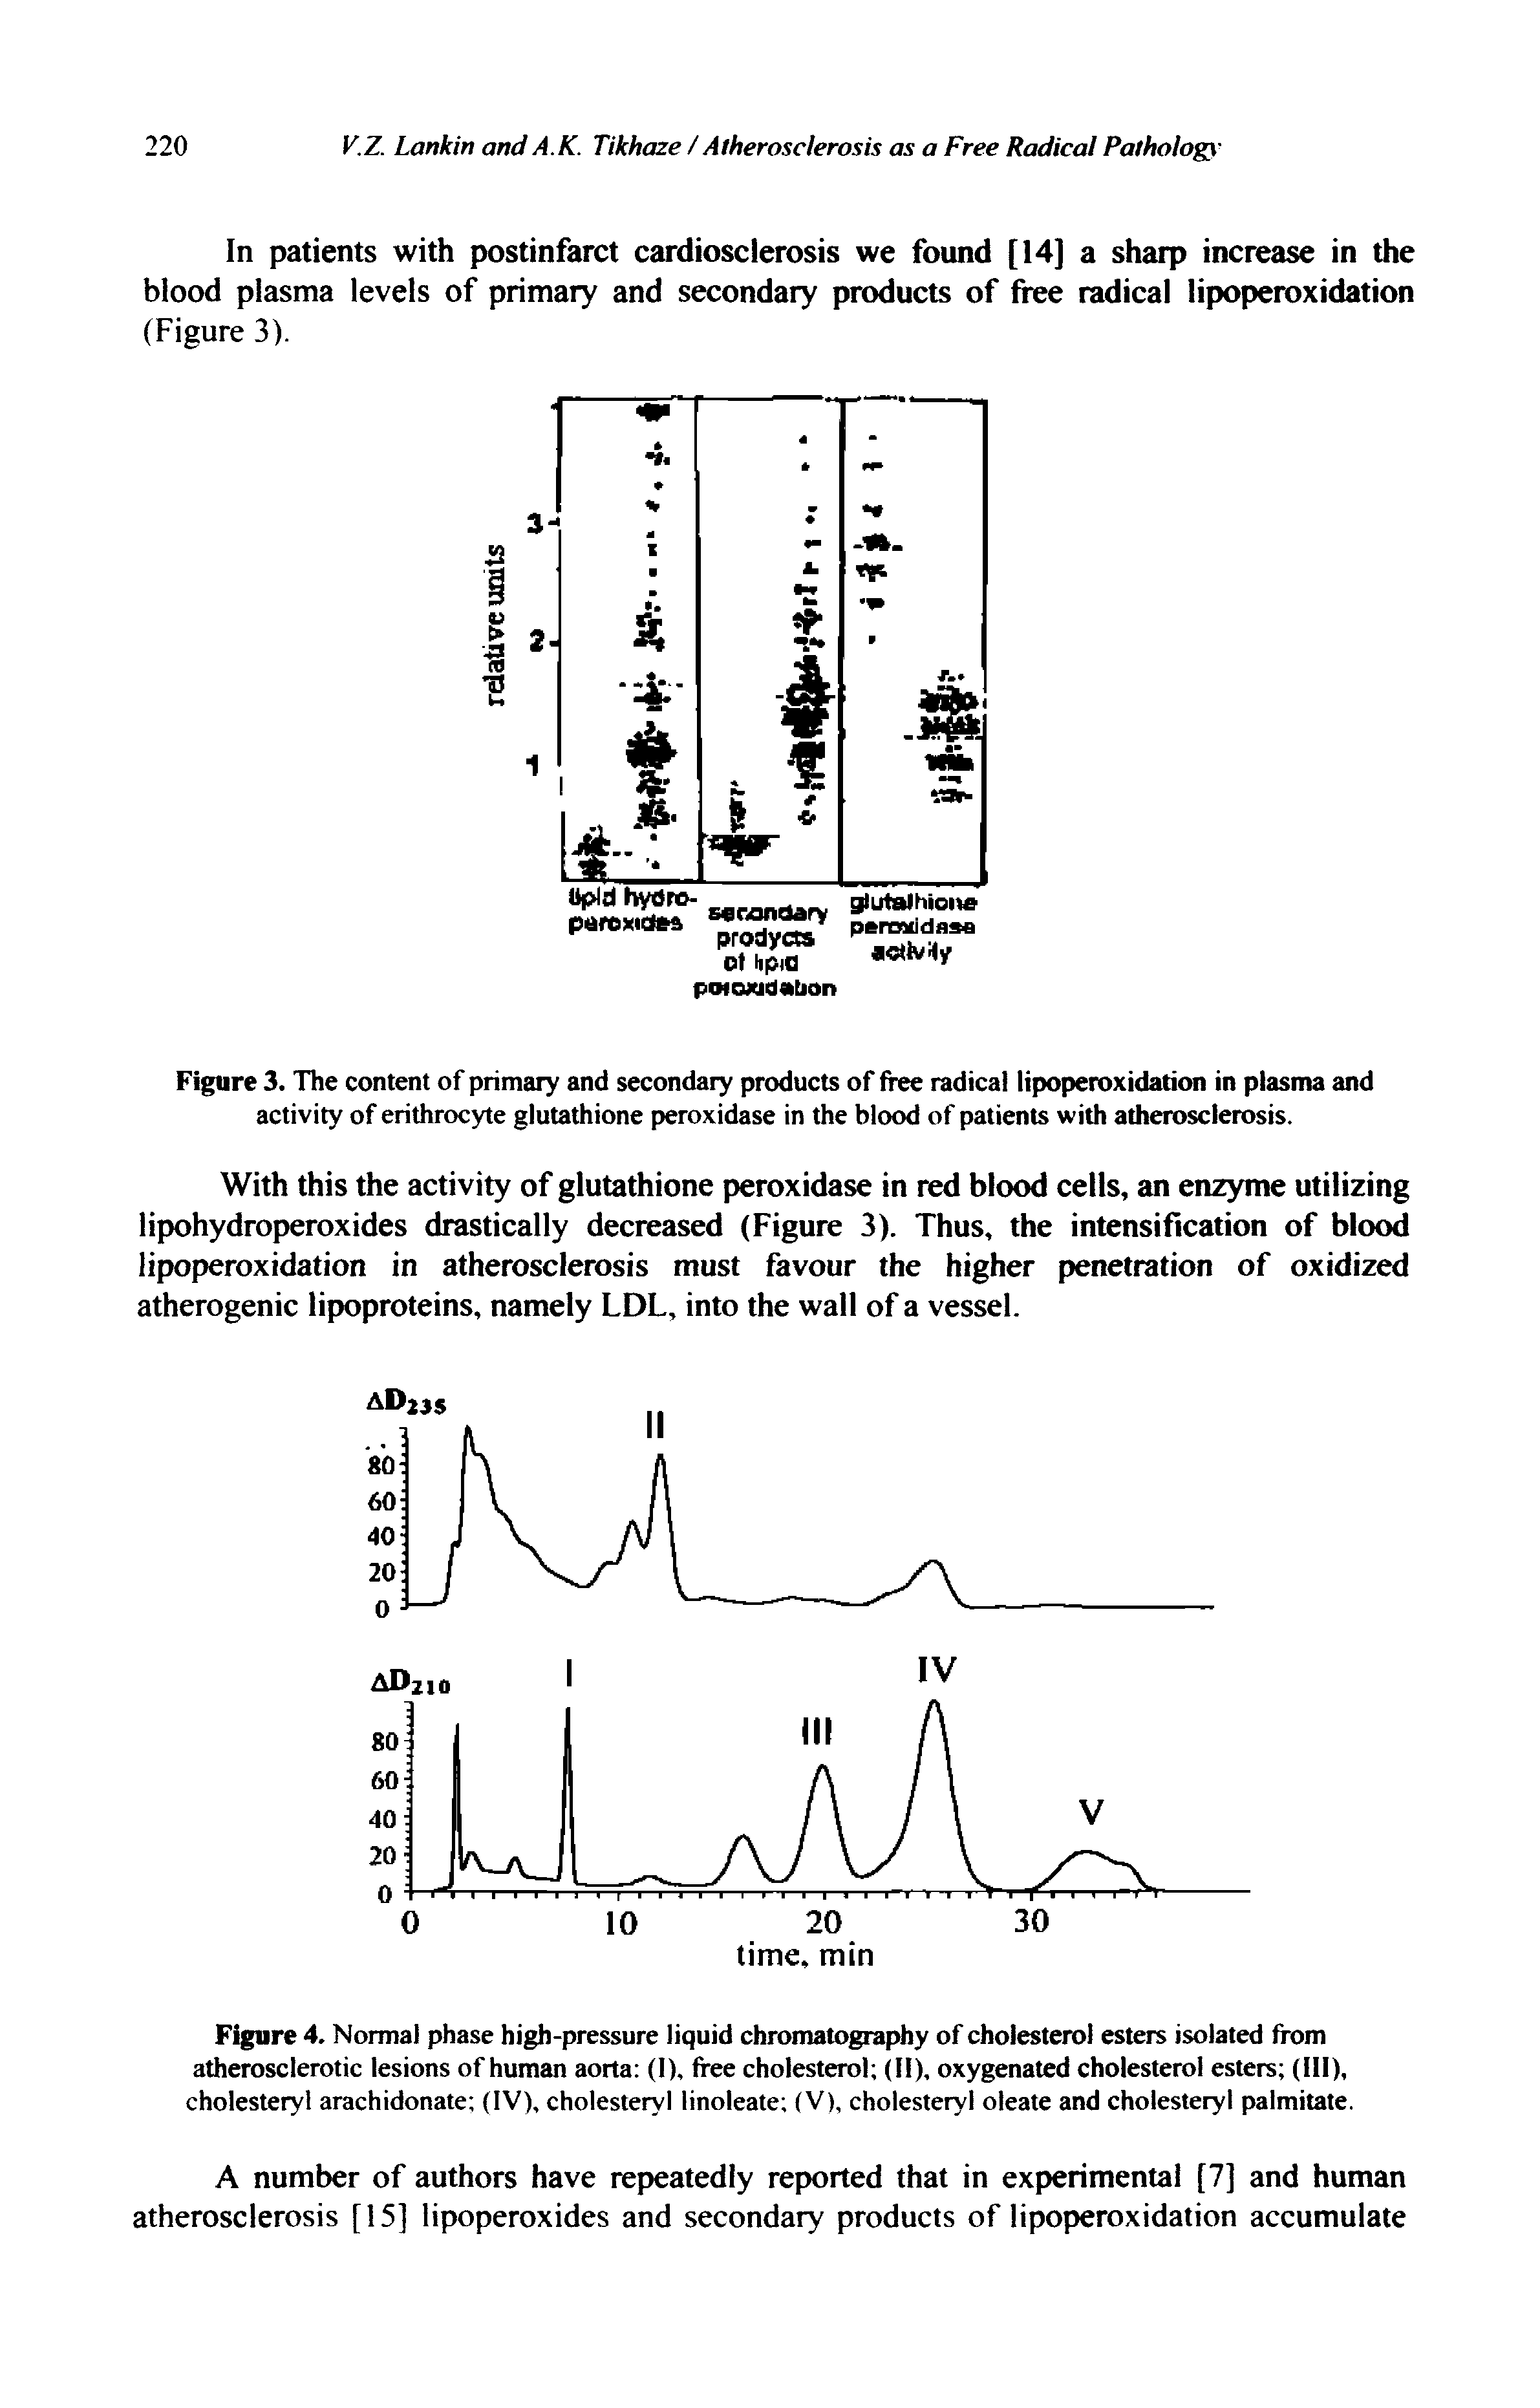 Figure 4. Normal phase high-pressure liquid chromatography of cholesterol esters isolated from atherosclerotic lesions of human aorta (I), free cholesterol (II), oxygenated cholesterol esters (III), cholesteryl arachidonate (IV), cholesteryl linoleate (V), cholesteryl oleate and cholesteryl palmitate.